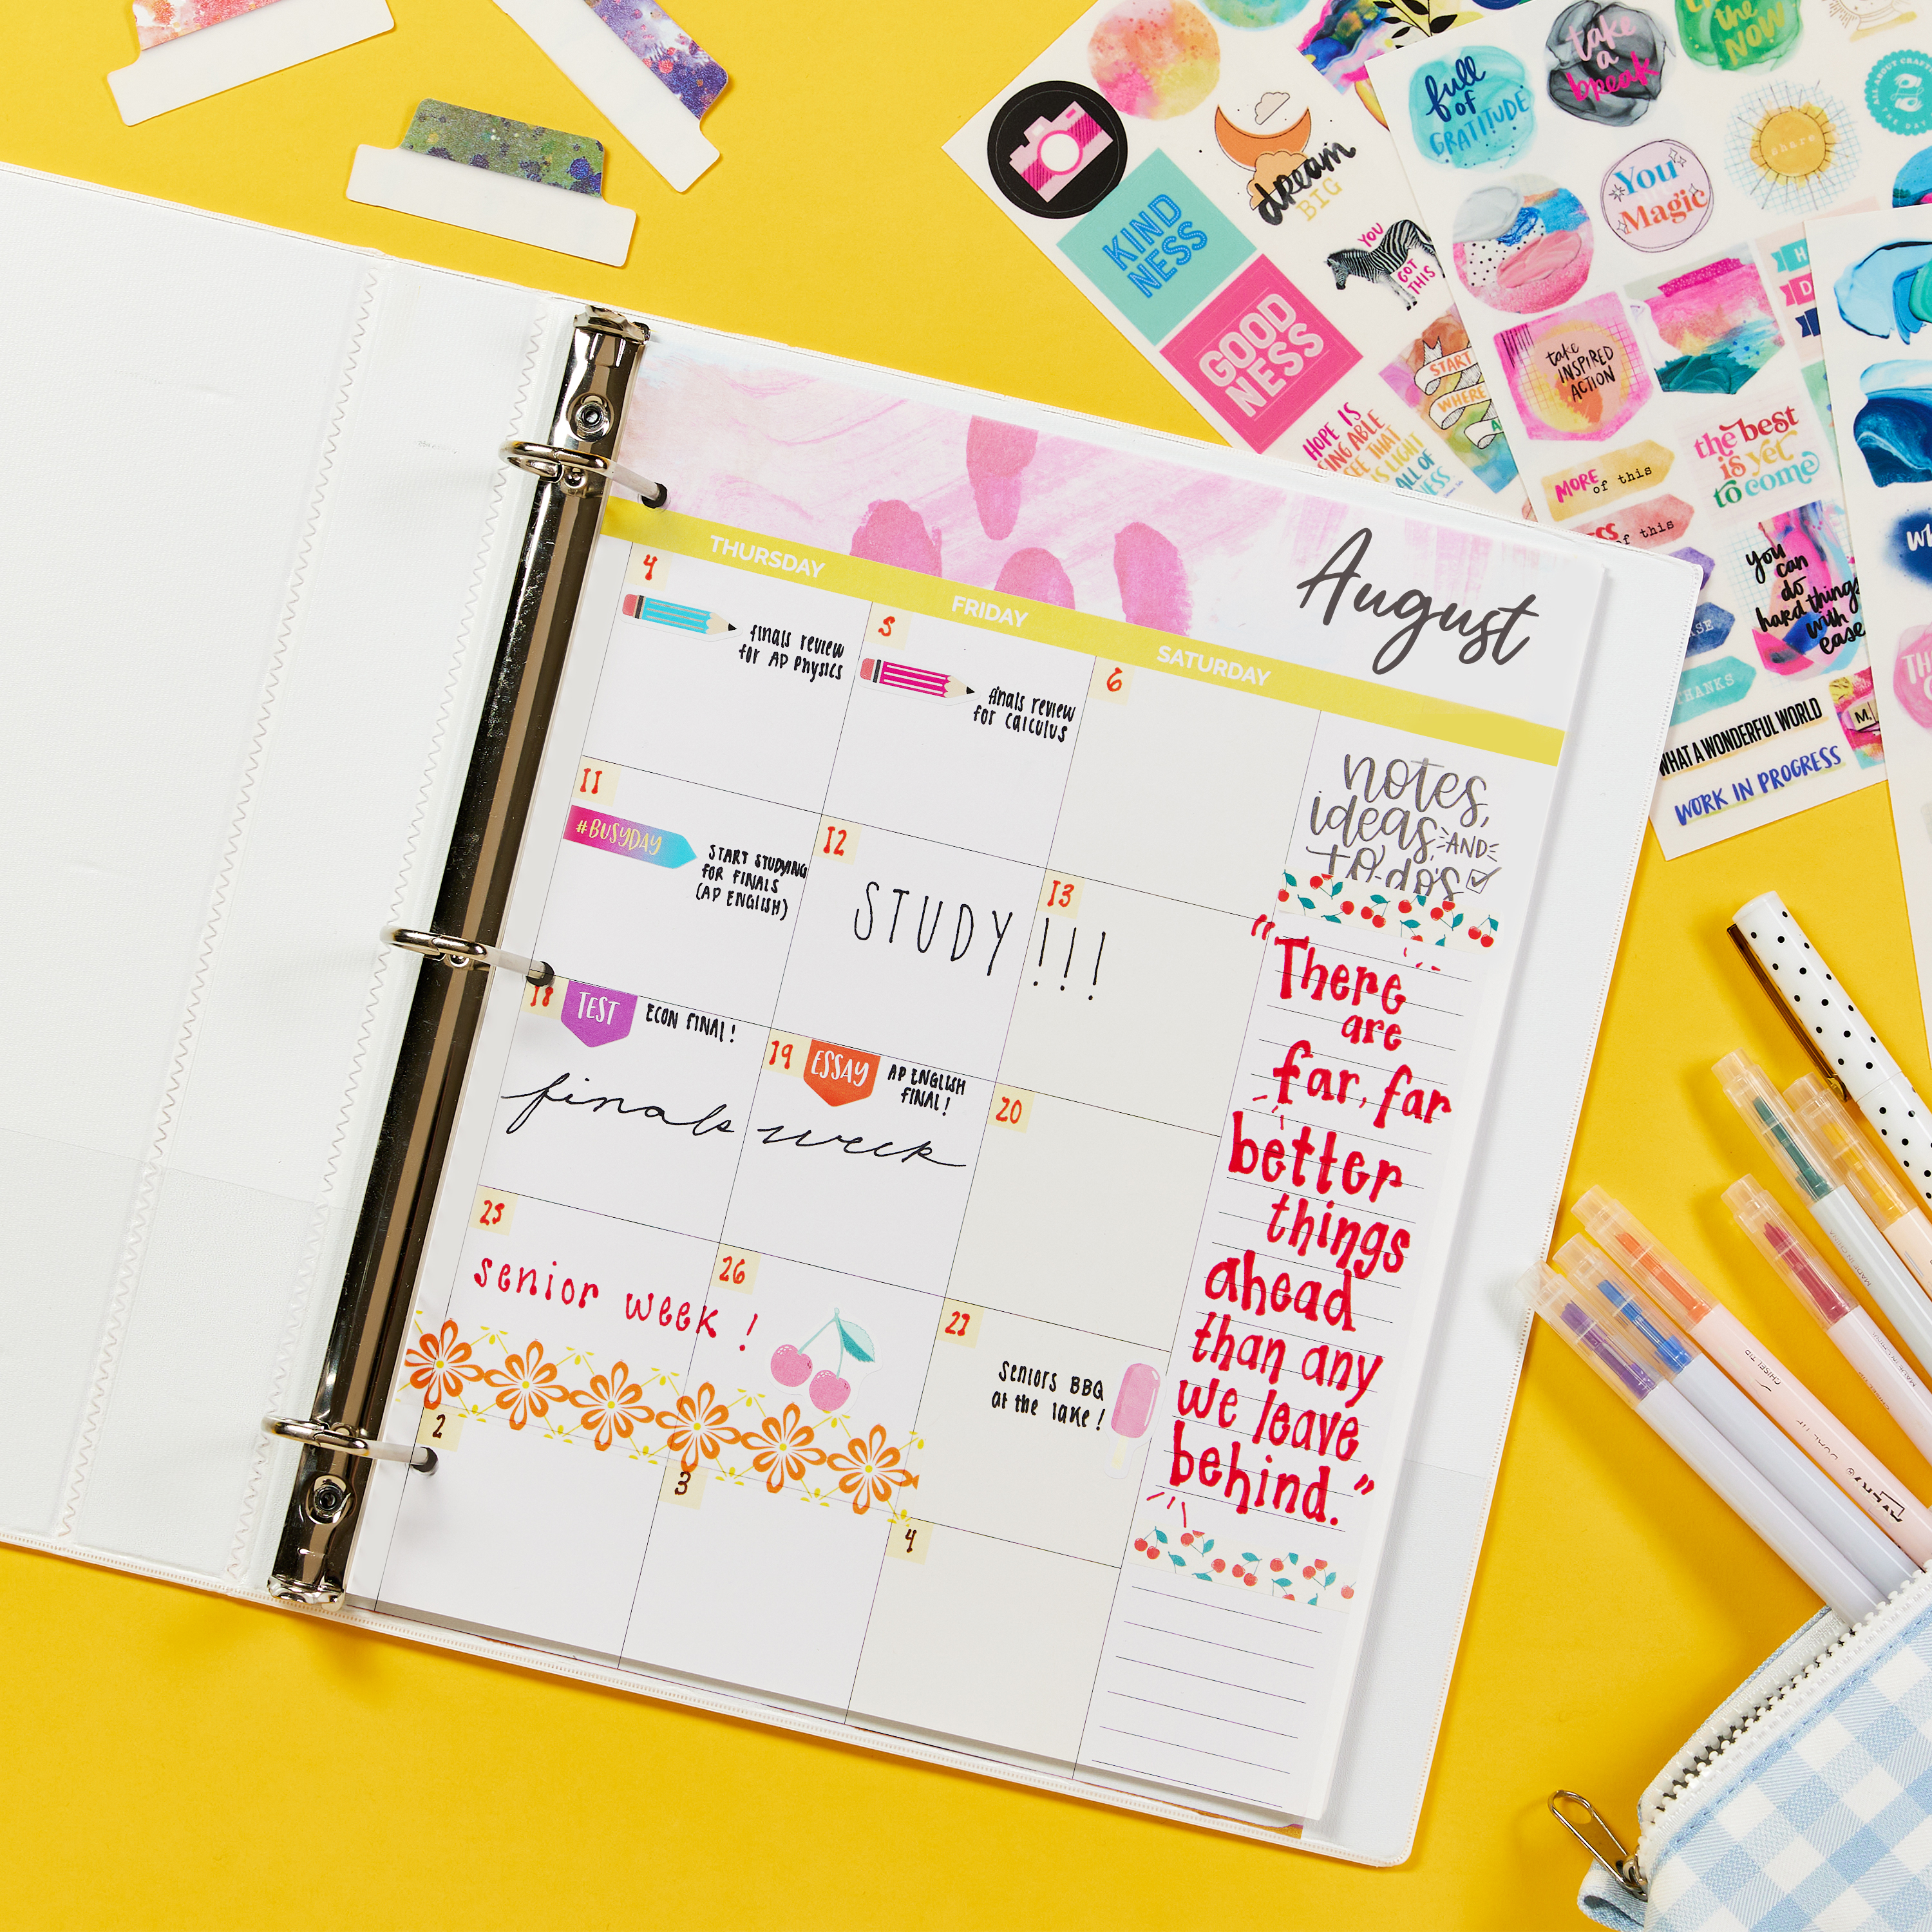 This image shows an example of DIY student planner made with Avery 1.5 inch binder 79795. The binder is laid open on a yellow background and surrounded by Avery Ultra Tabs, planner stickers and markers. Inside the binder are printed planner sheets.